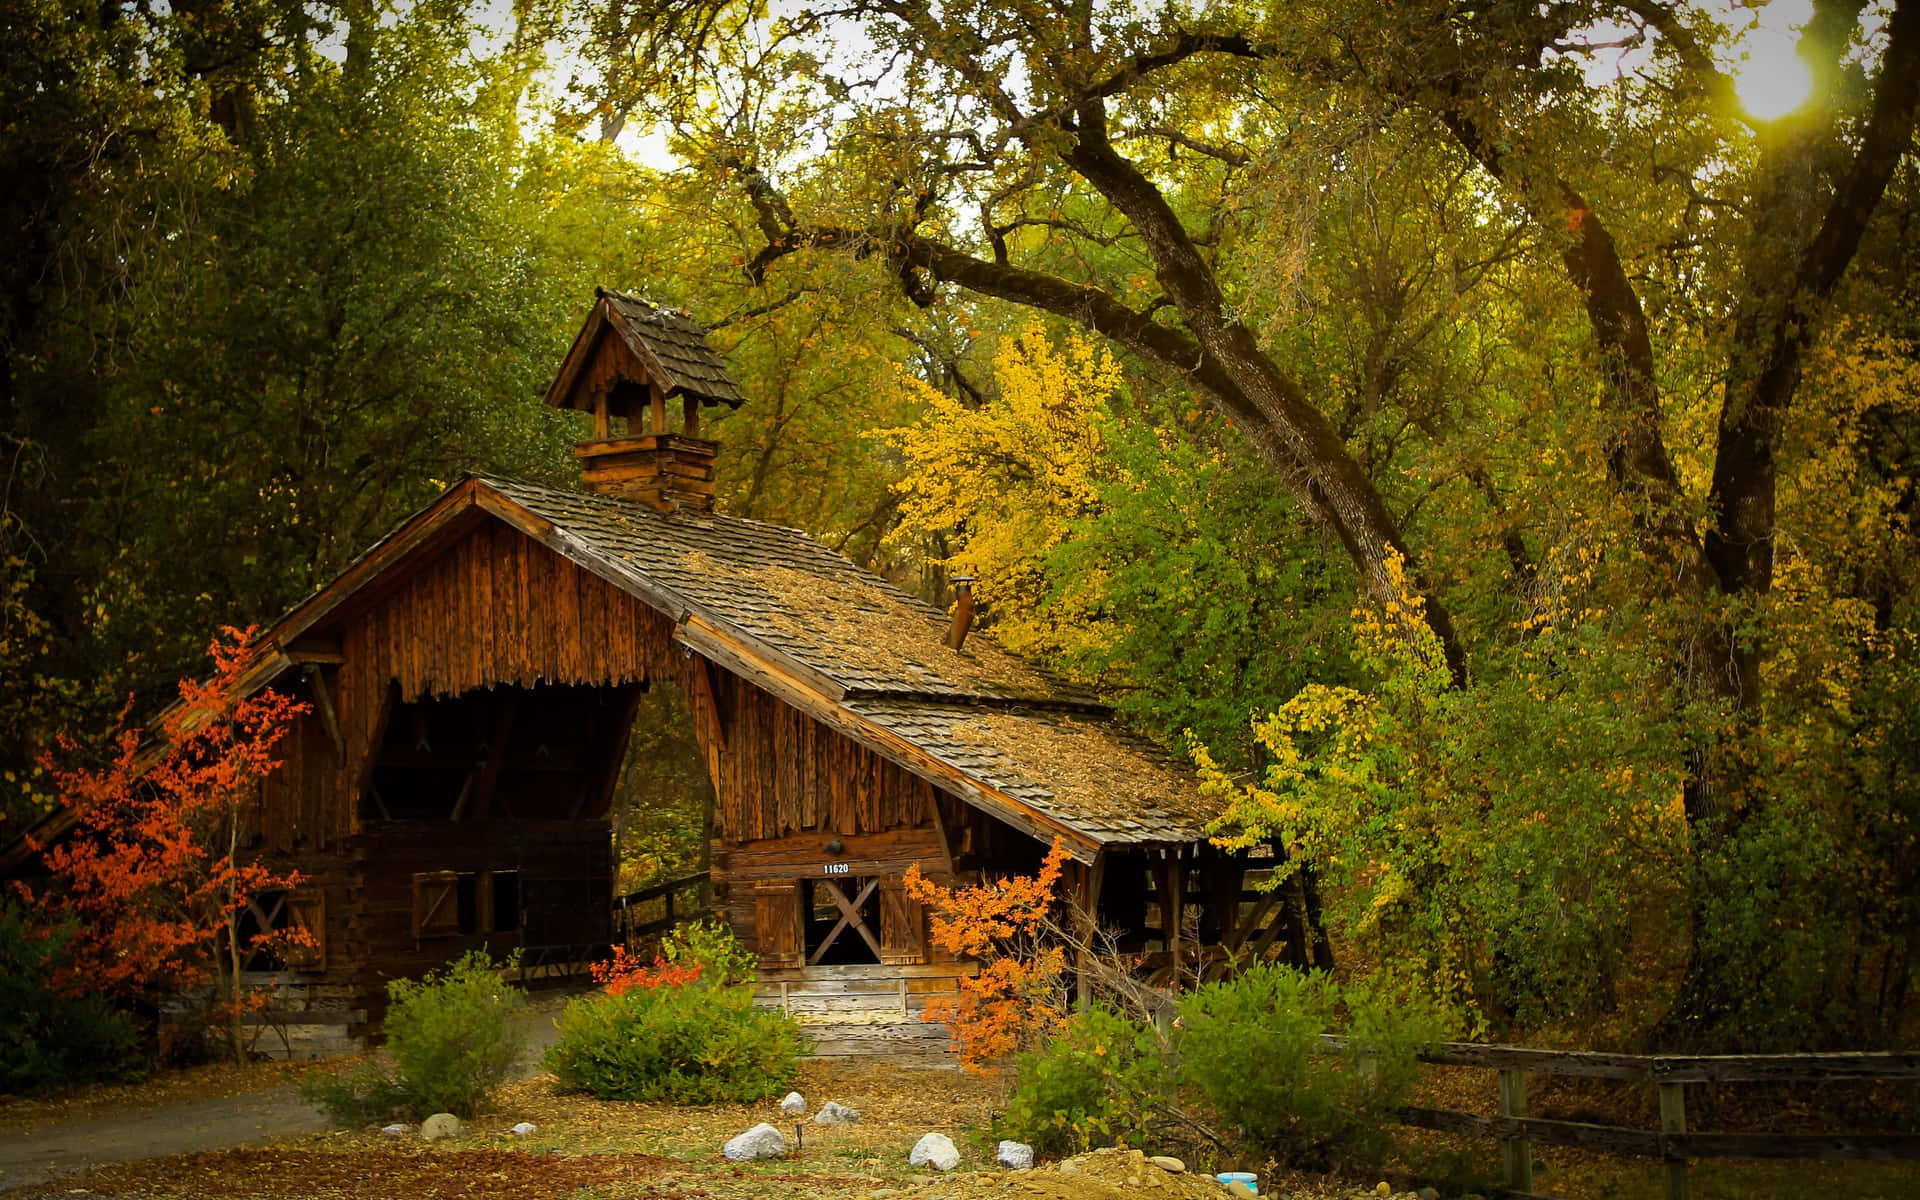 A beautiful rustic barn surrounded by vibrant foliage during the fall season. Wallpaper